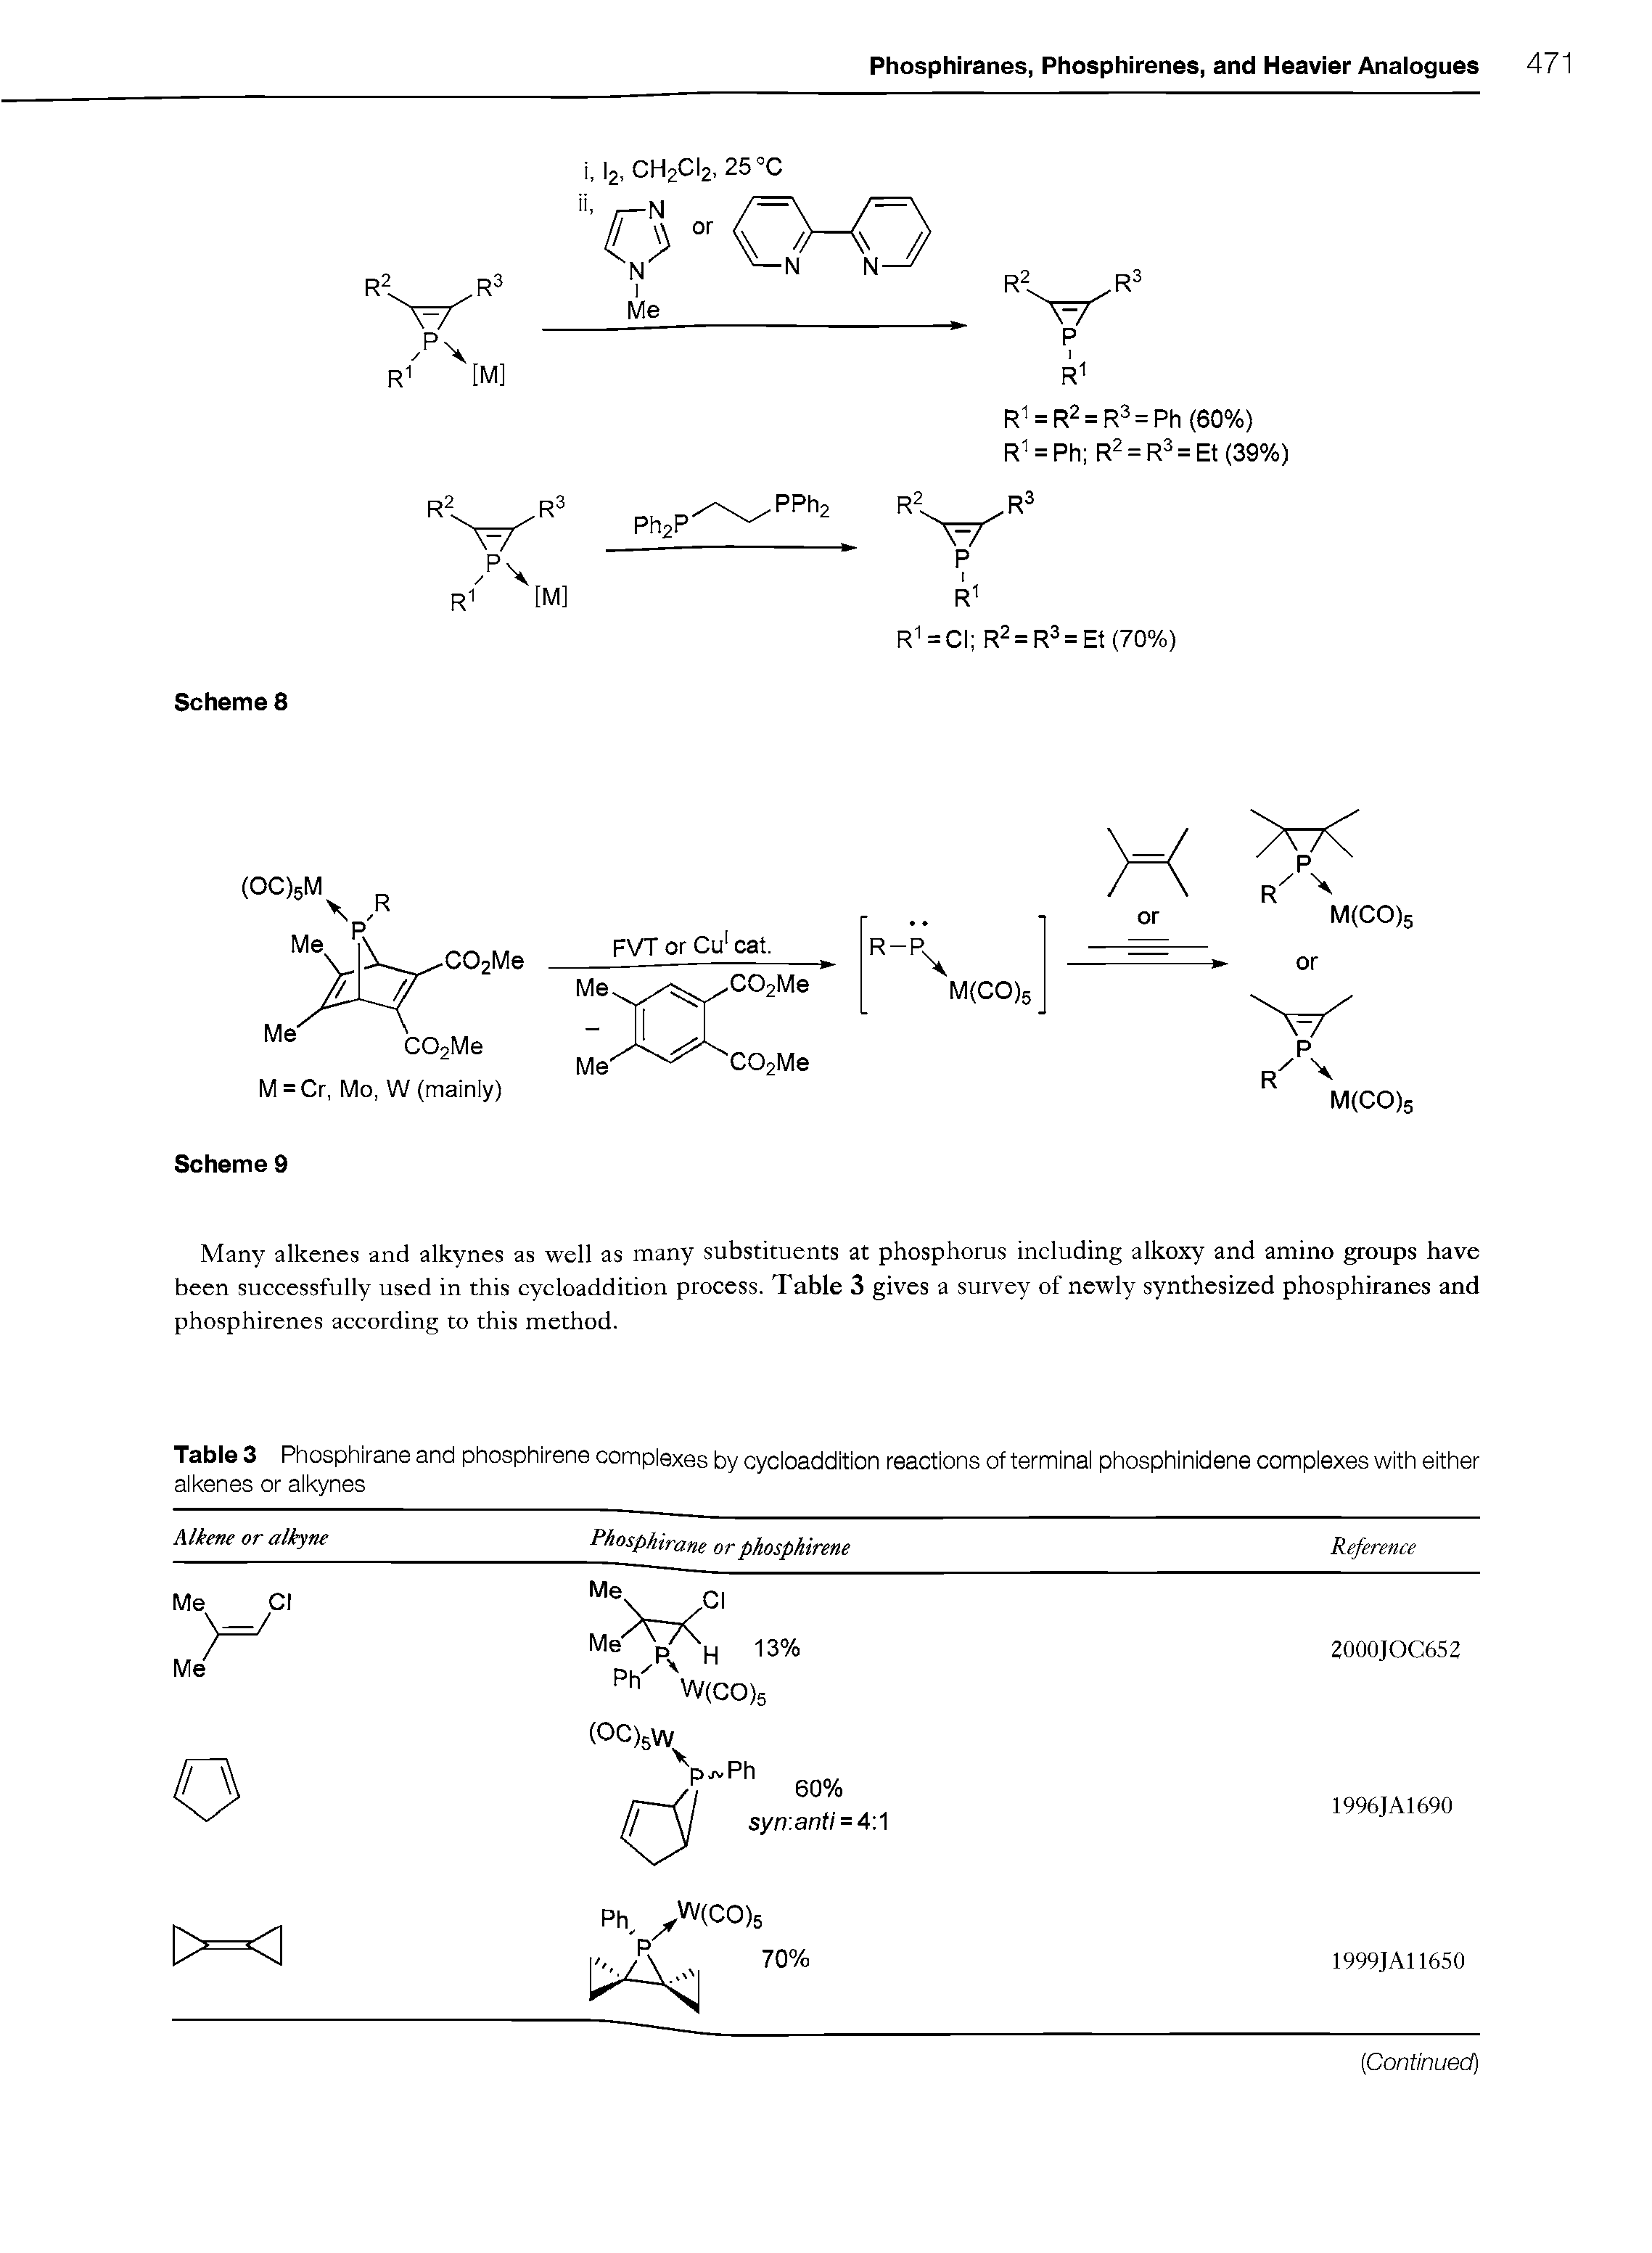 Table 3 Phosphirane and phosphirene complexes by cycloaddition reactions of terminal phosphinidene complexes with either alkenes or alkynes...